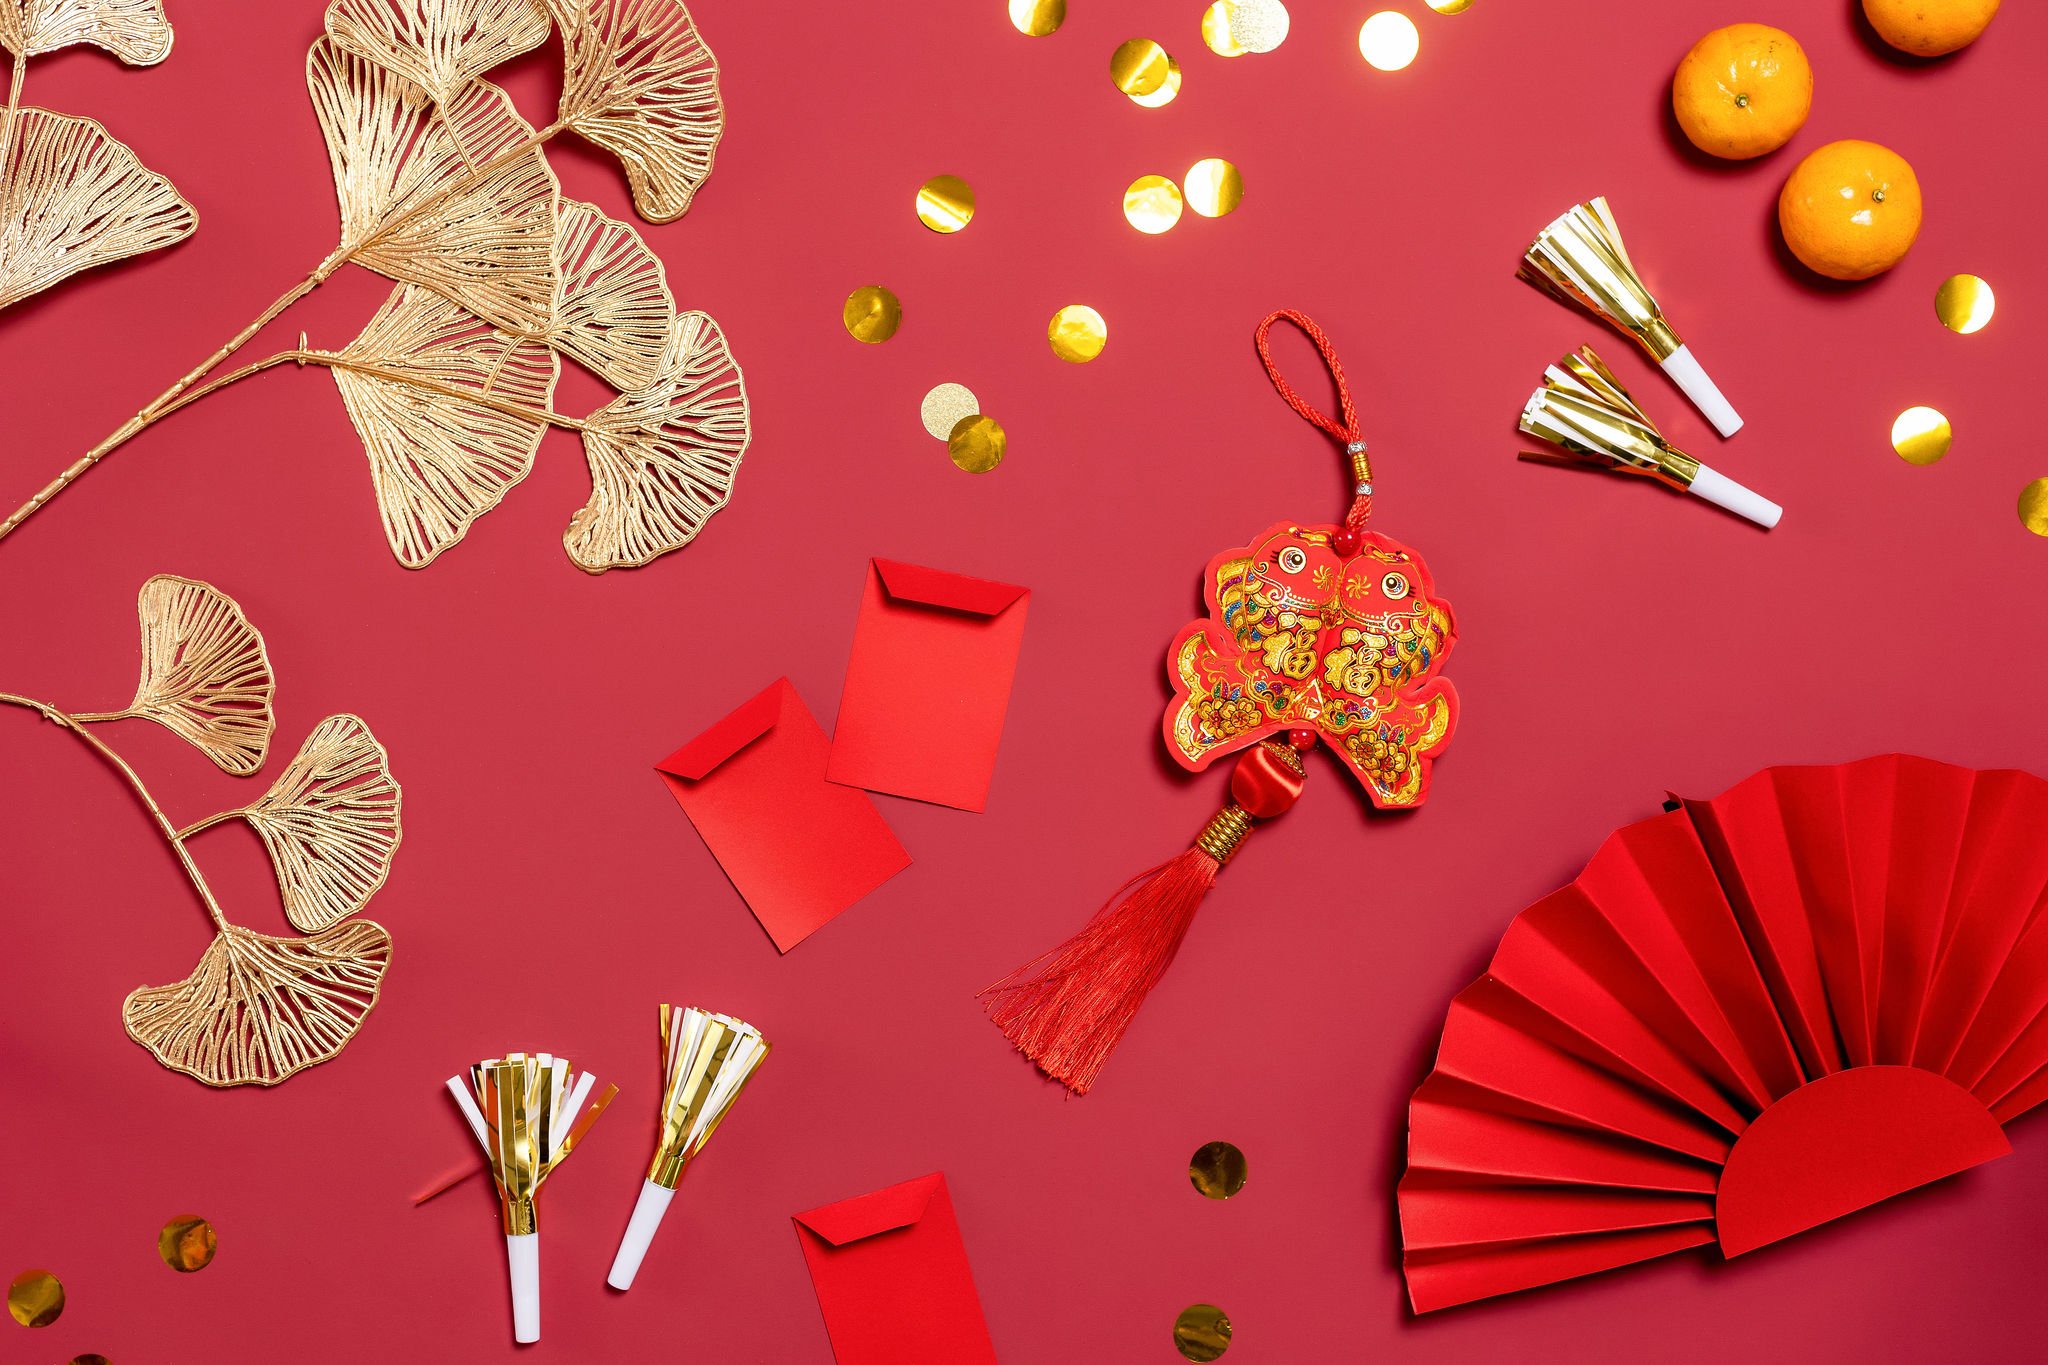 Canberra product photography - fun lunar new year flatlay